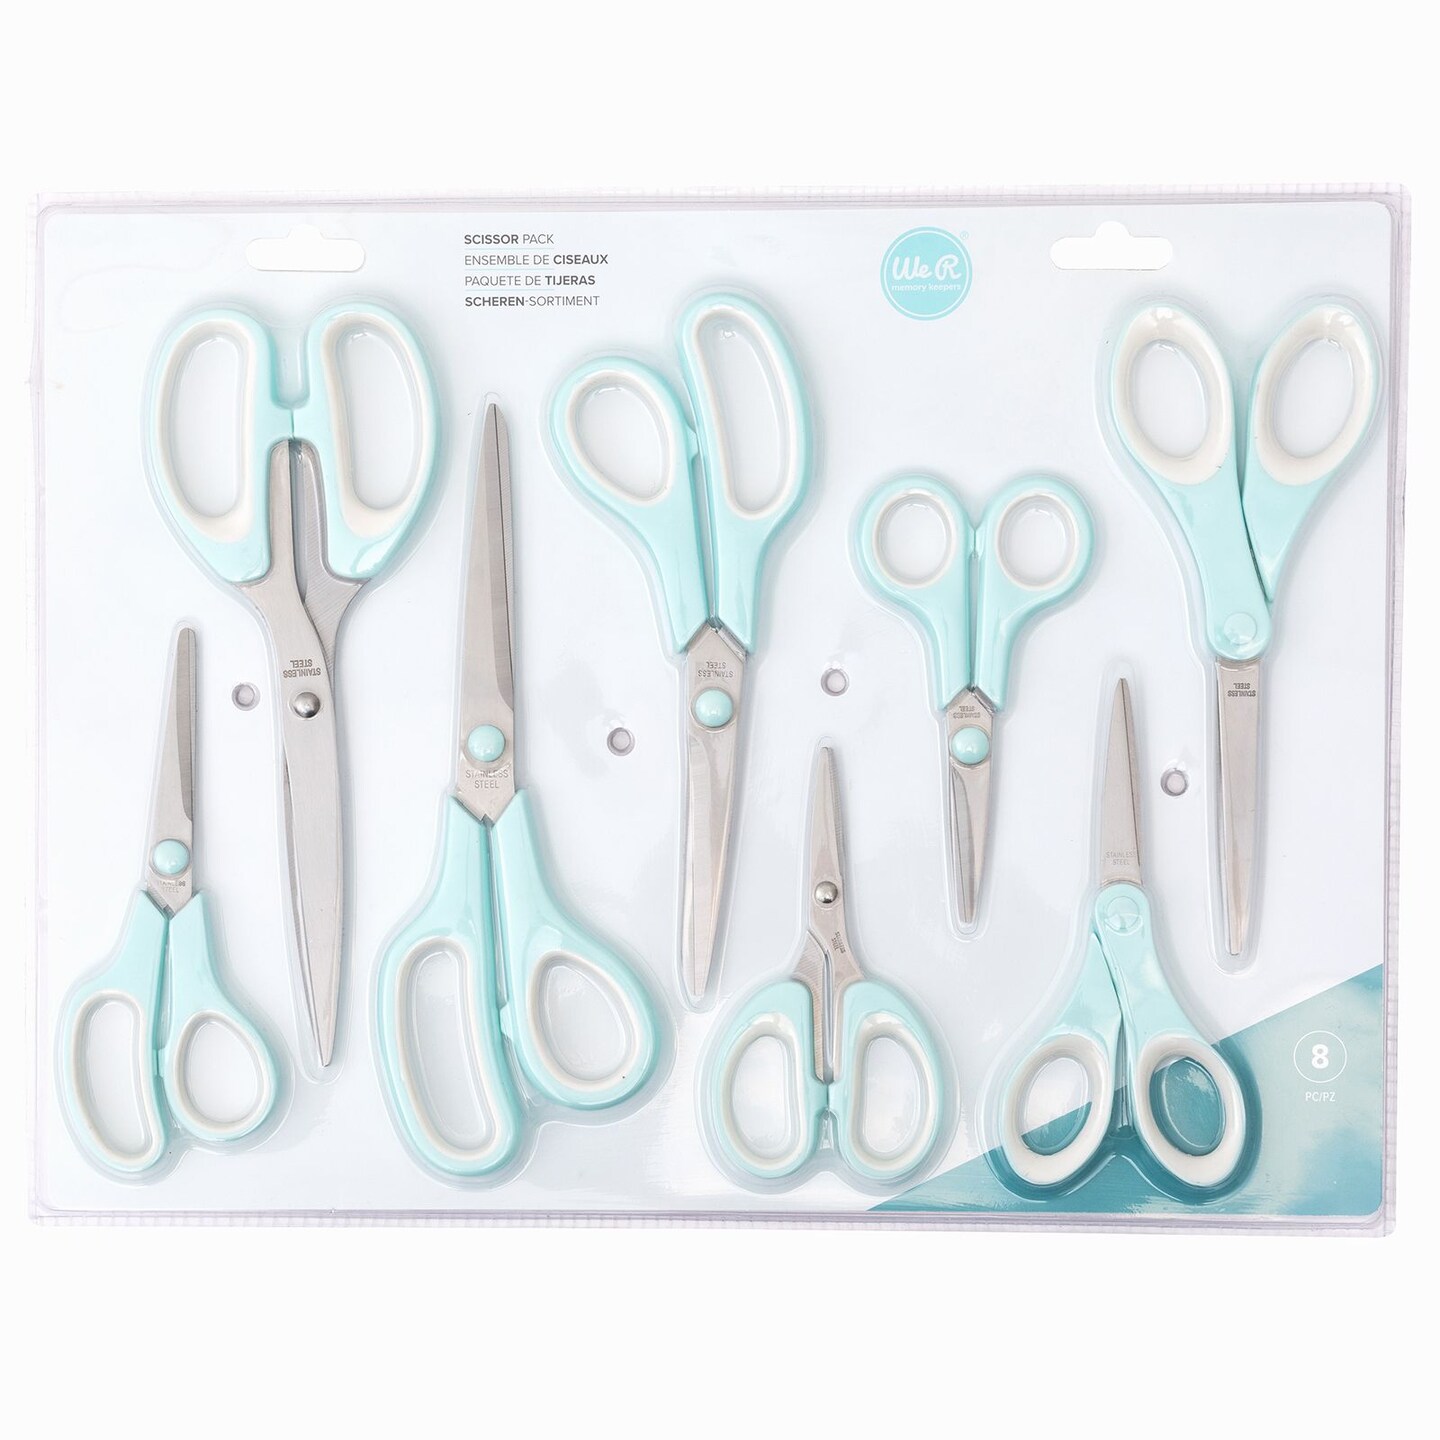 We R Memory Keepers - Scissors - Value Set - 8 Pack 60000398 By American Crafts